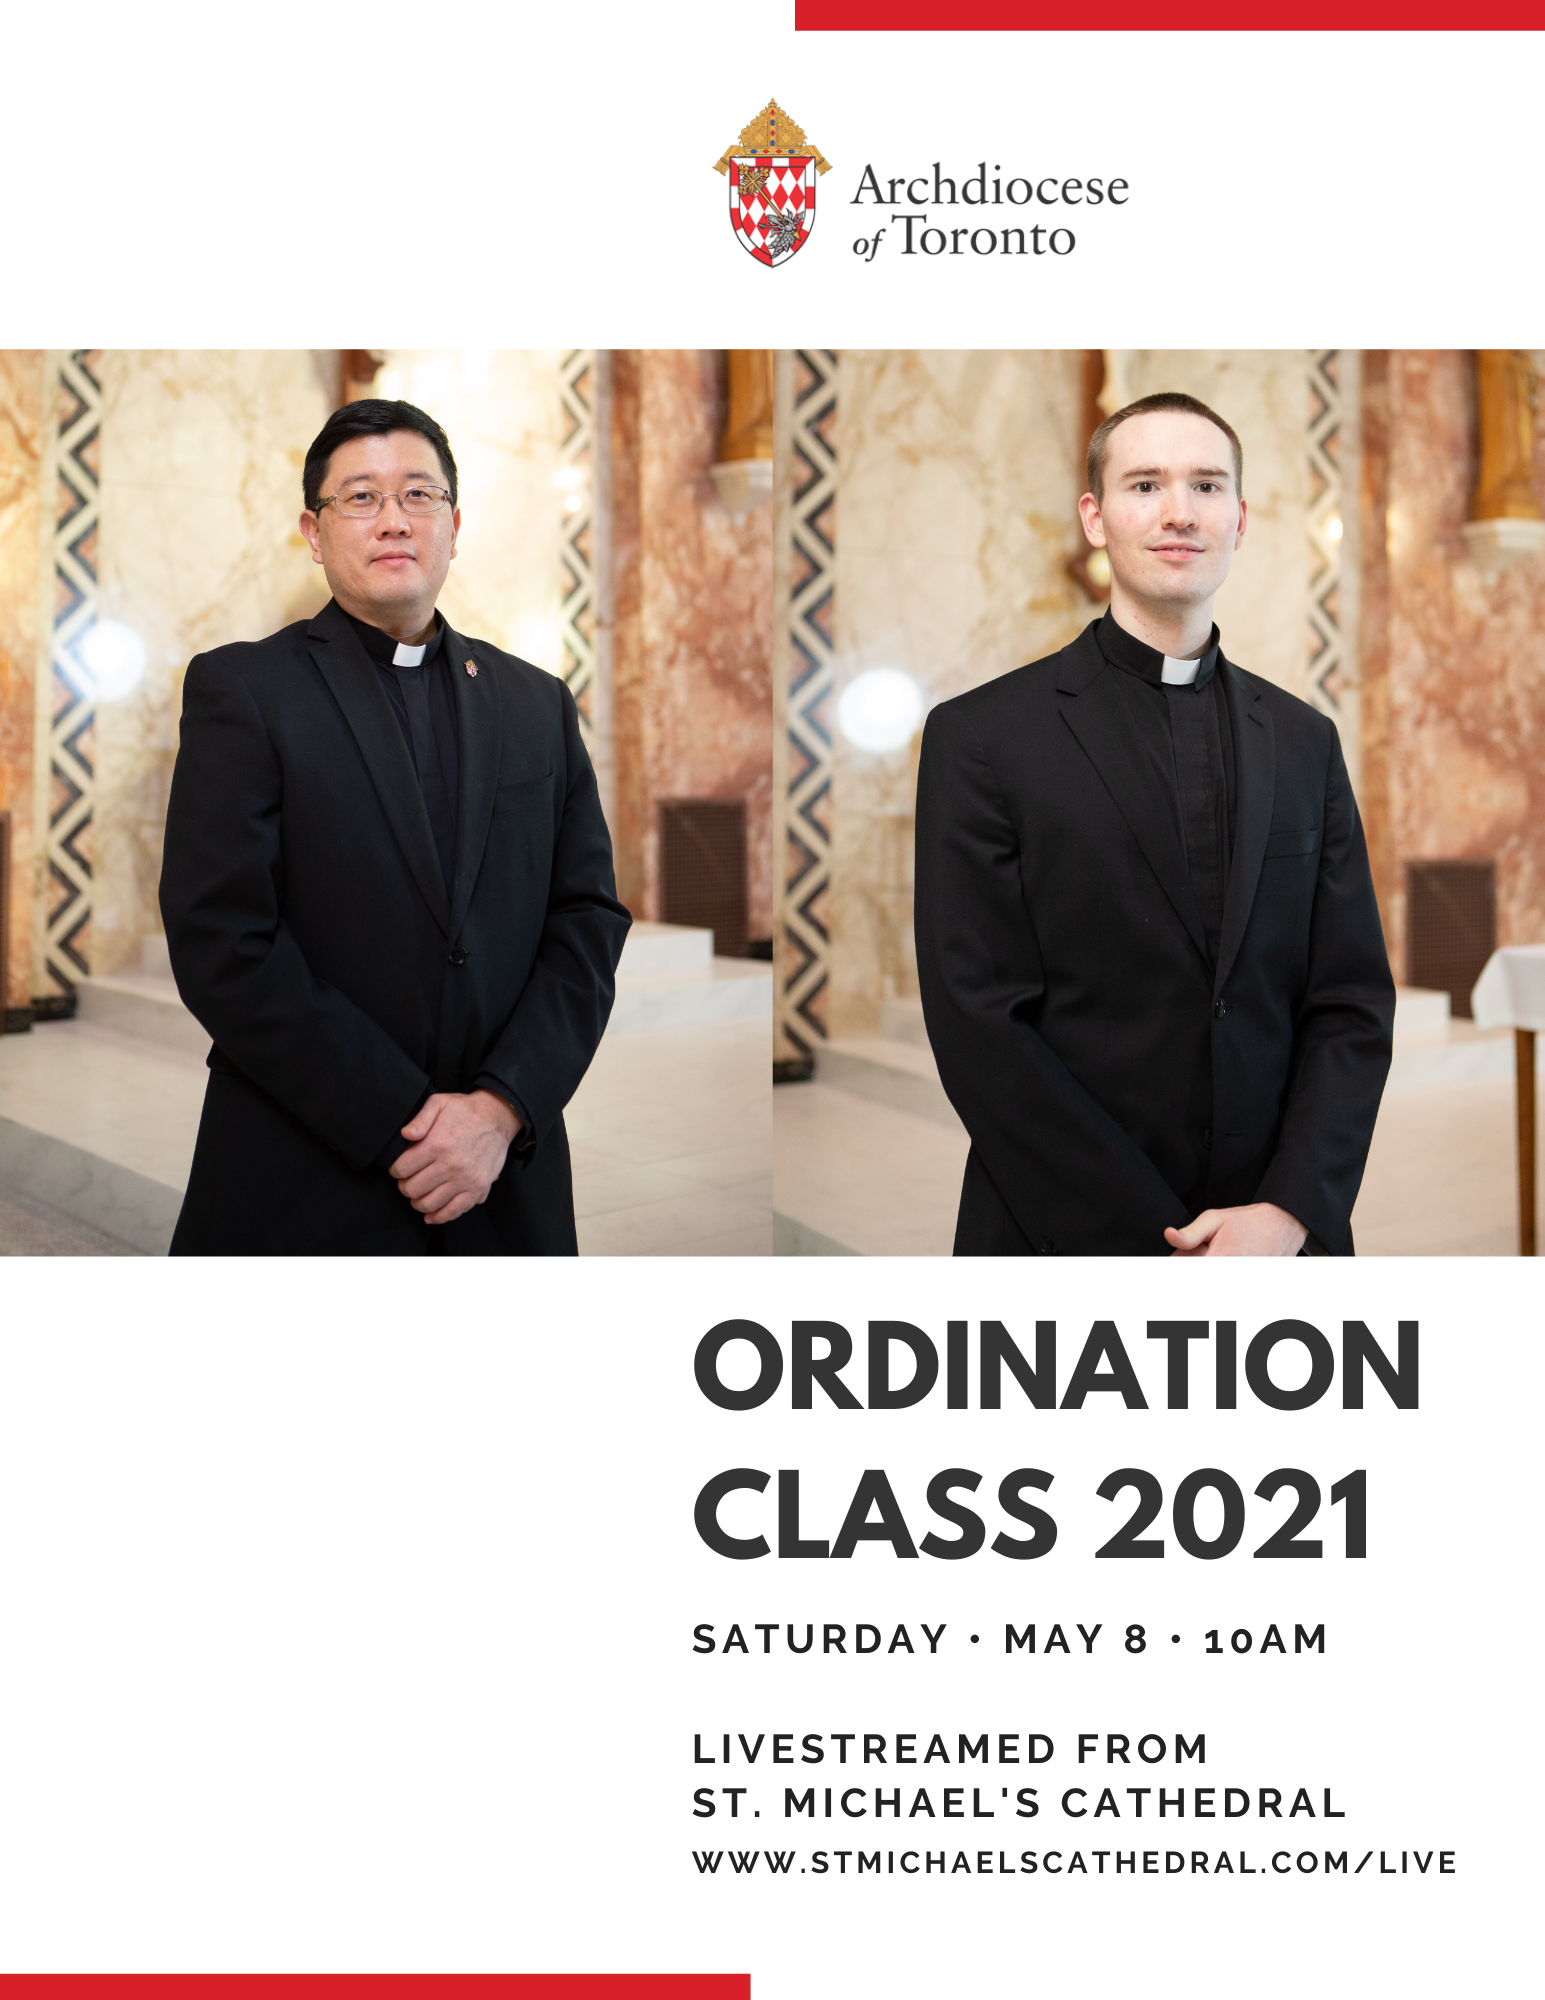 Photos of the two men who will be ordained to the priesthood of the Archdiocese of Toronto in 2021